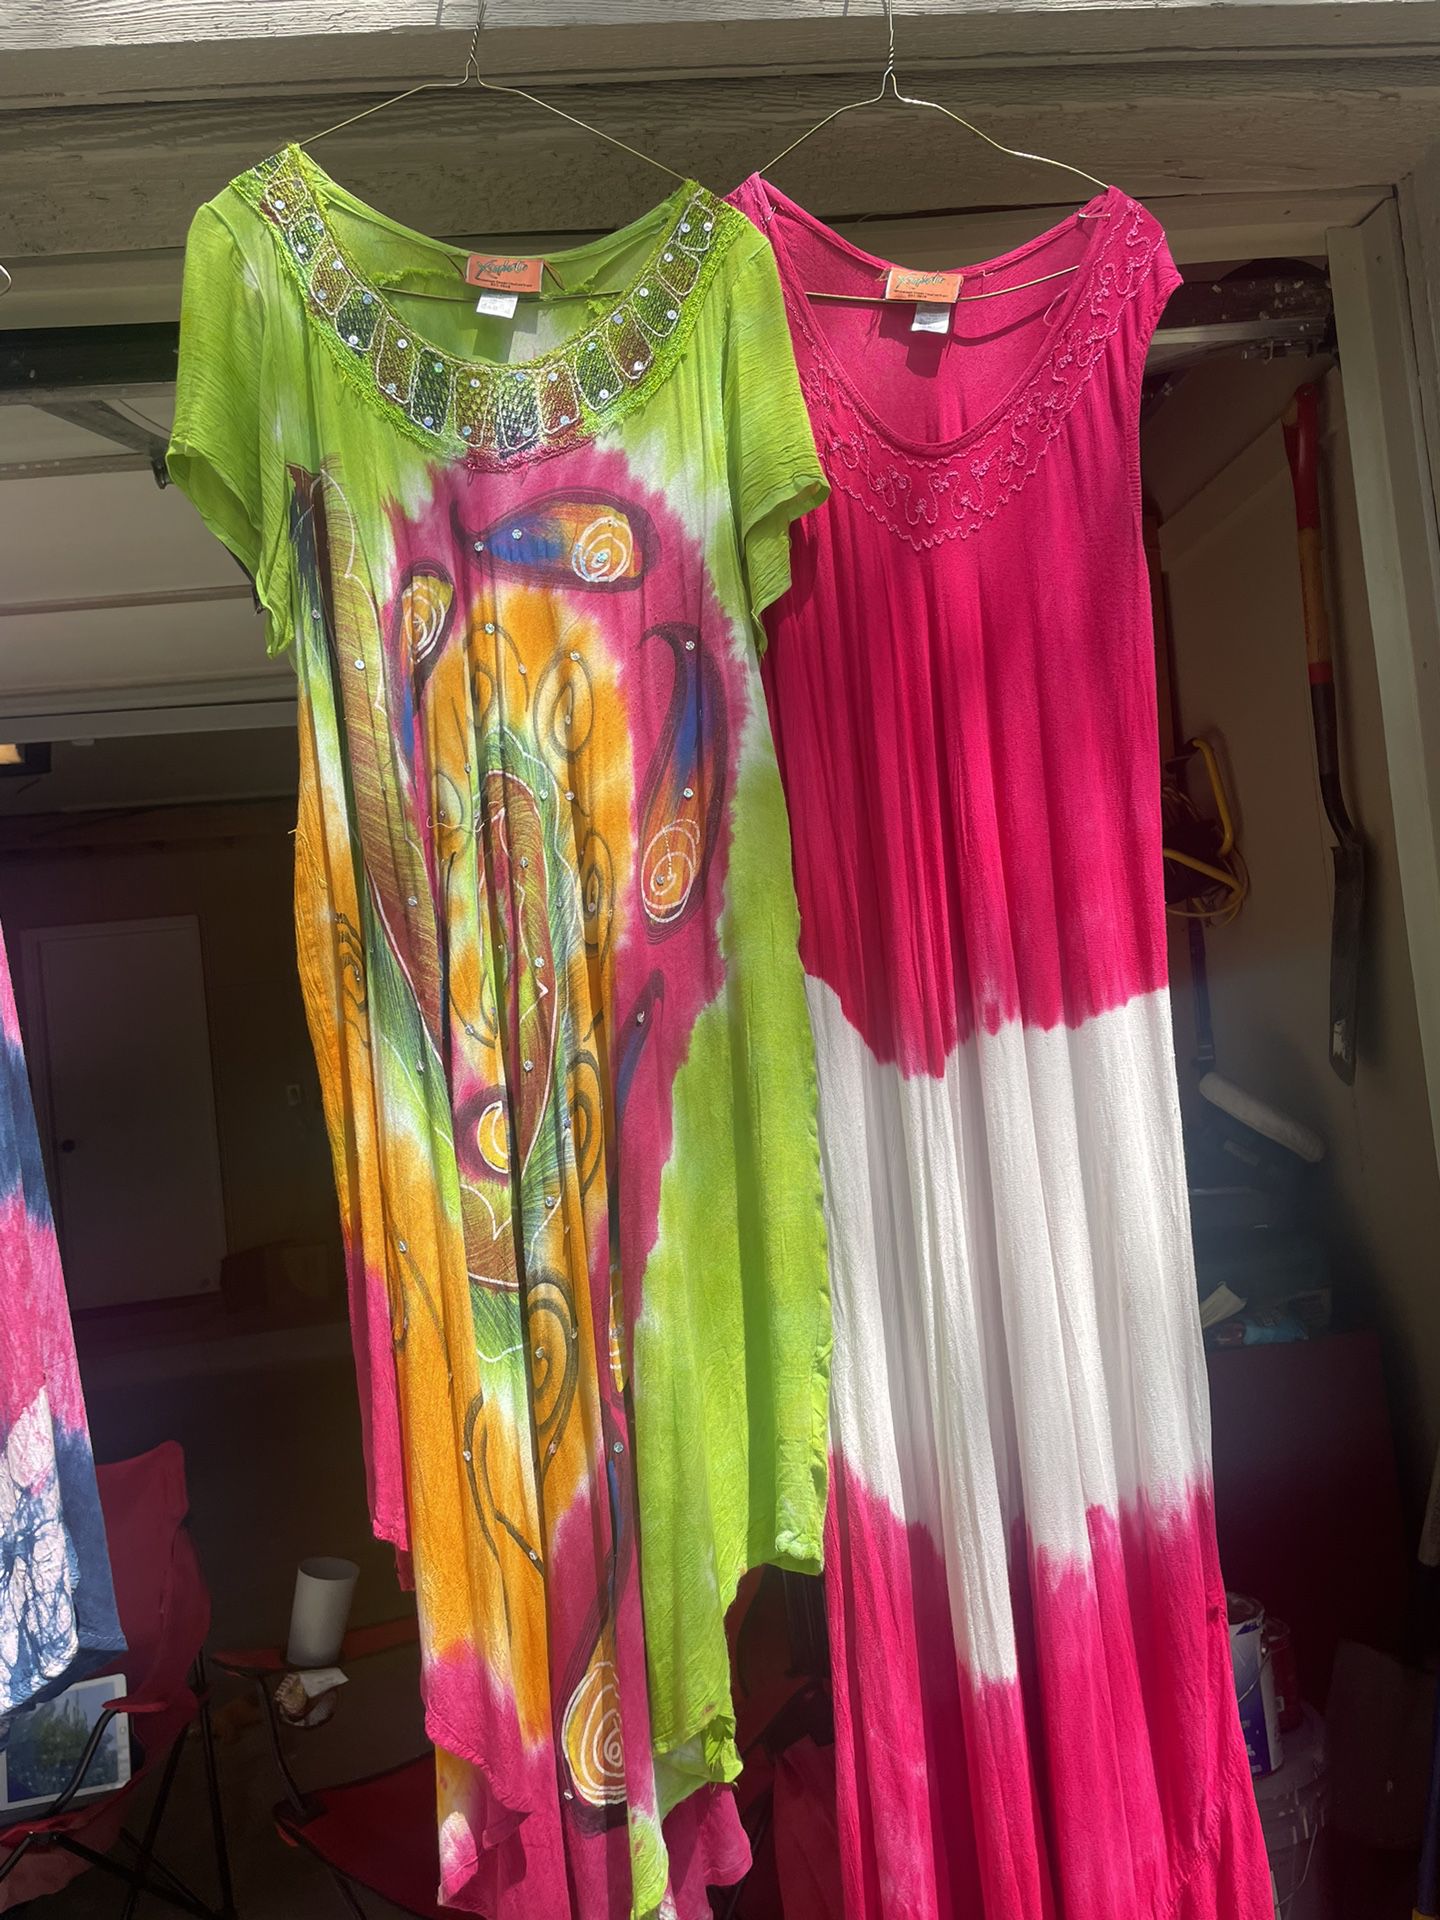 Beautiful Summer Dresses One Size Fits All $20 Each